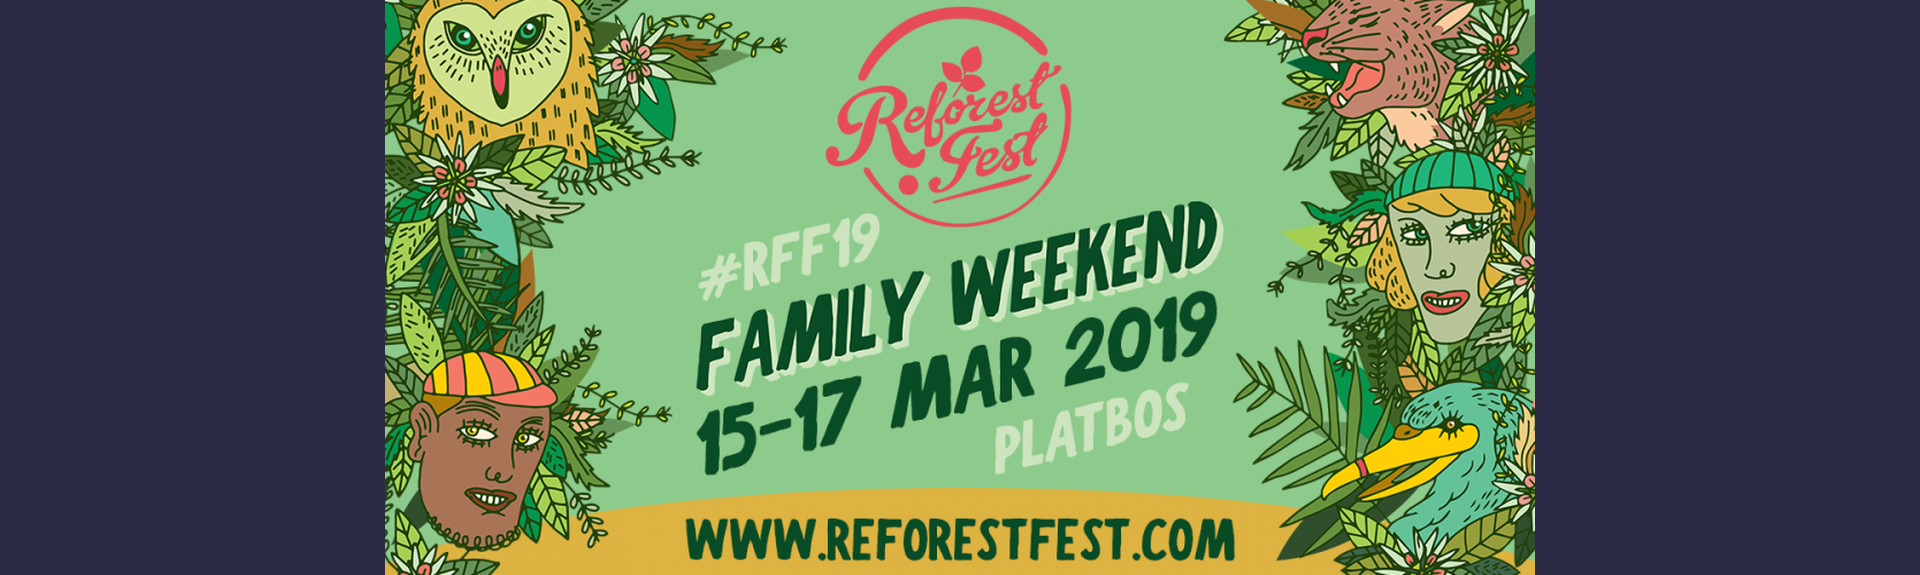 Reforest Fest Family Weekend